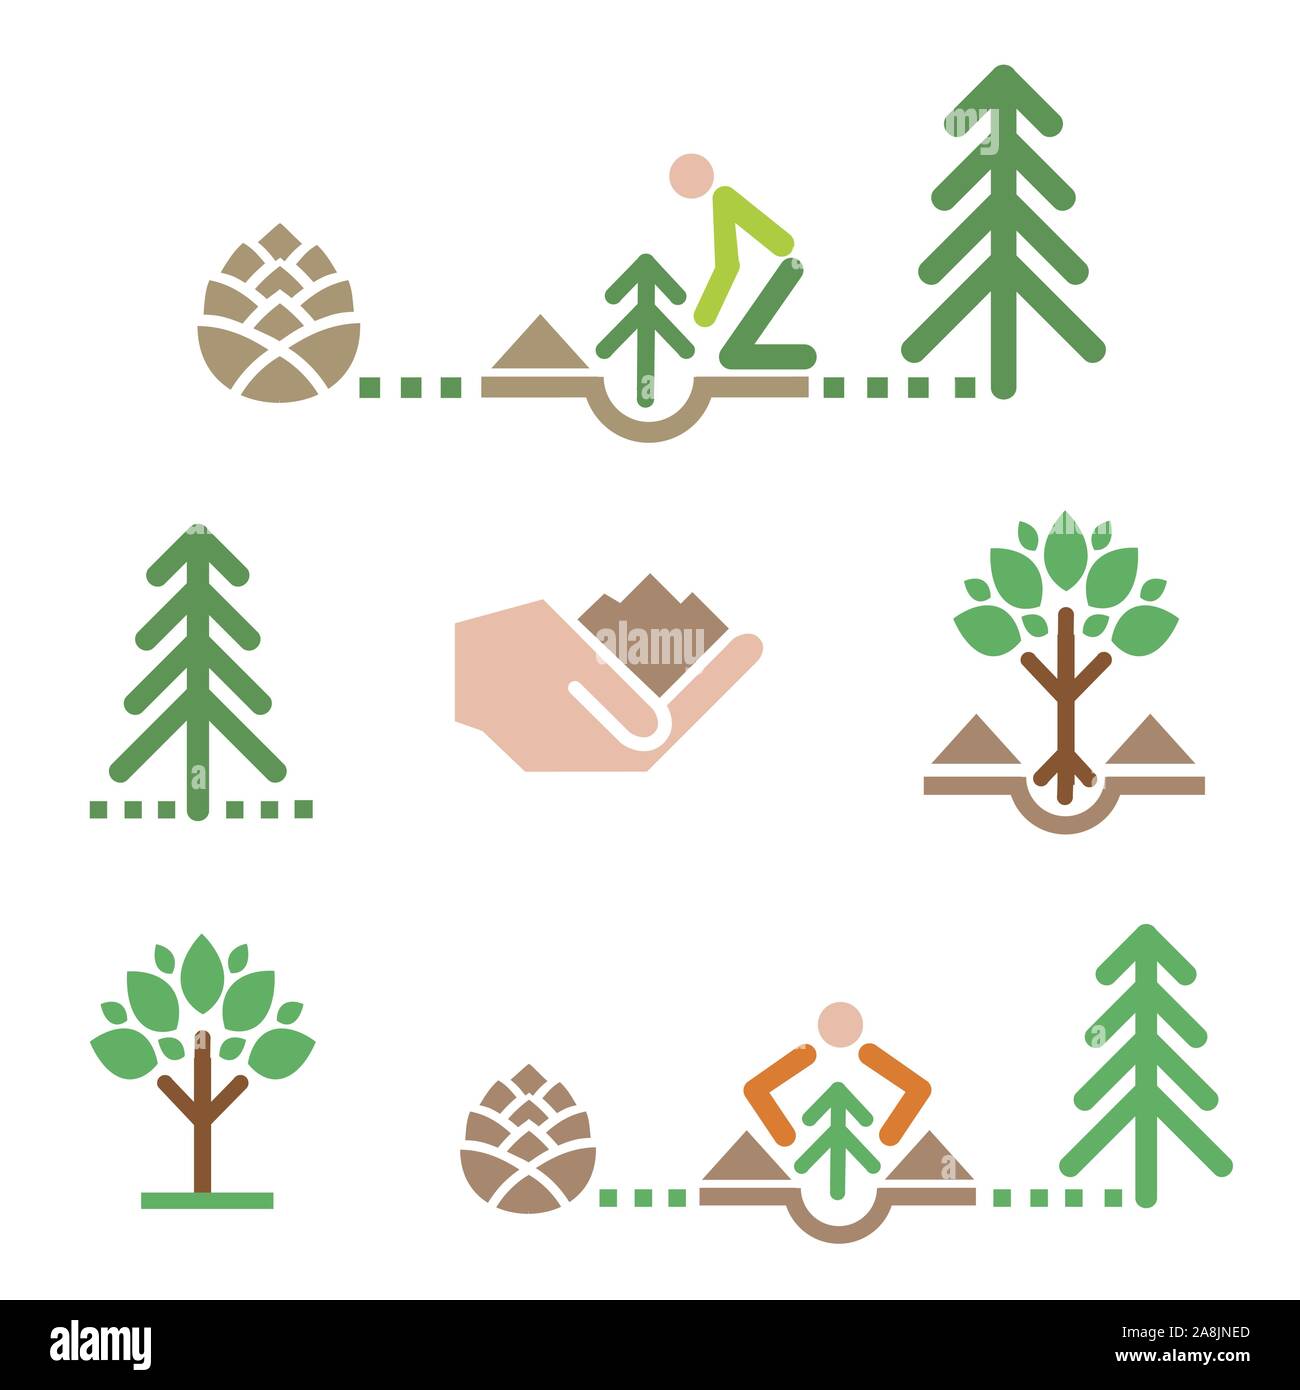 Tree icons, planting tree. Set of colorful icons with trees and tree planting.Vector available. Stock Vector